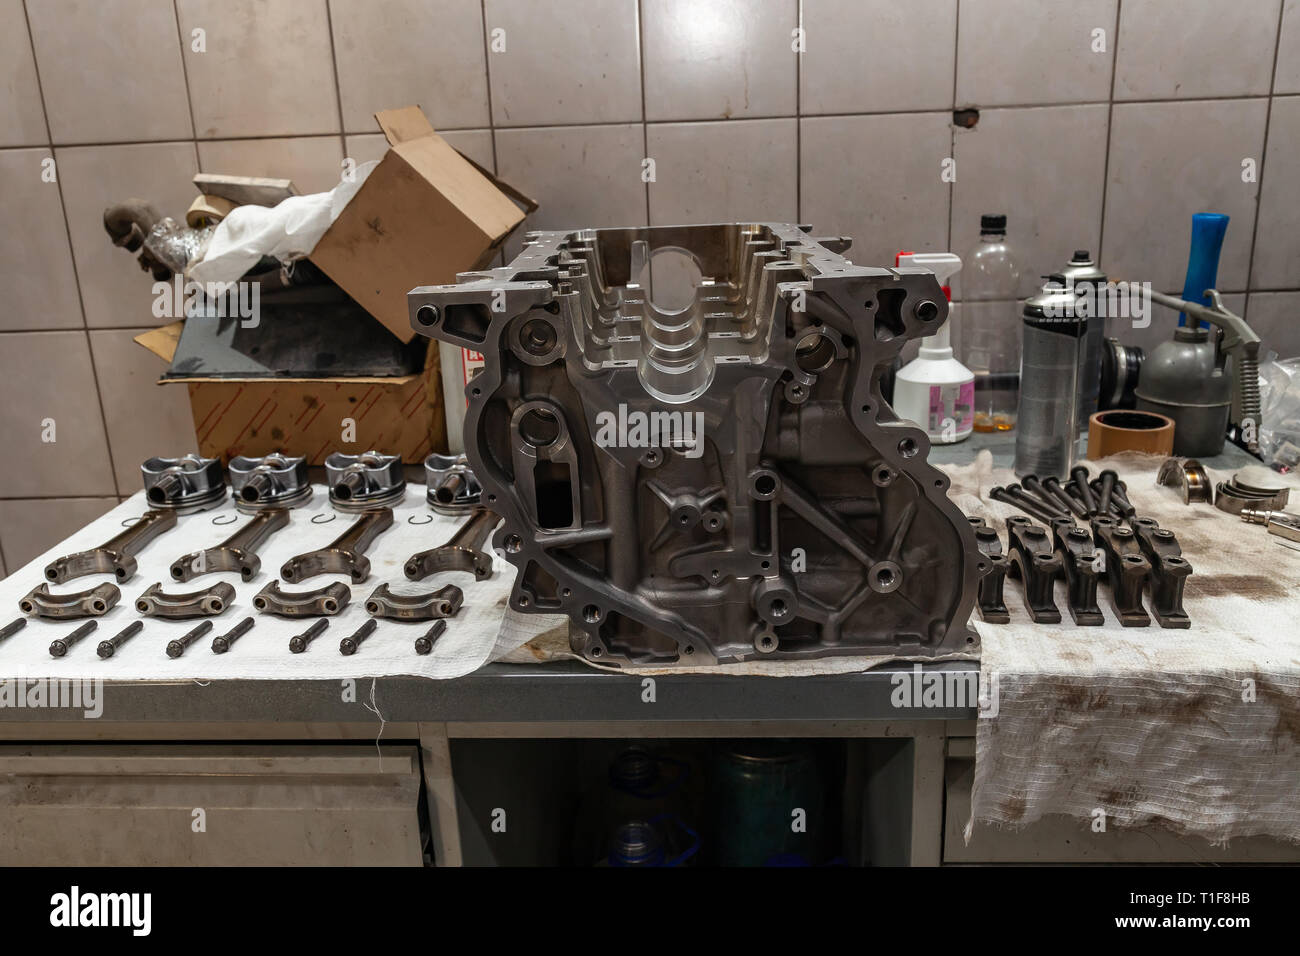 Engine connecting rods and pistons used and removed from a four-cylinder engine on a white soft cloth in a vehicle repair workshop. Auto service indus Stock Photo